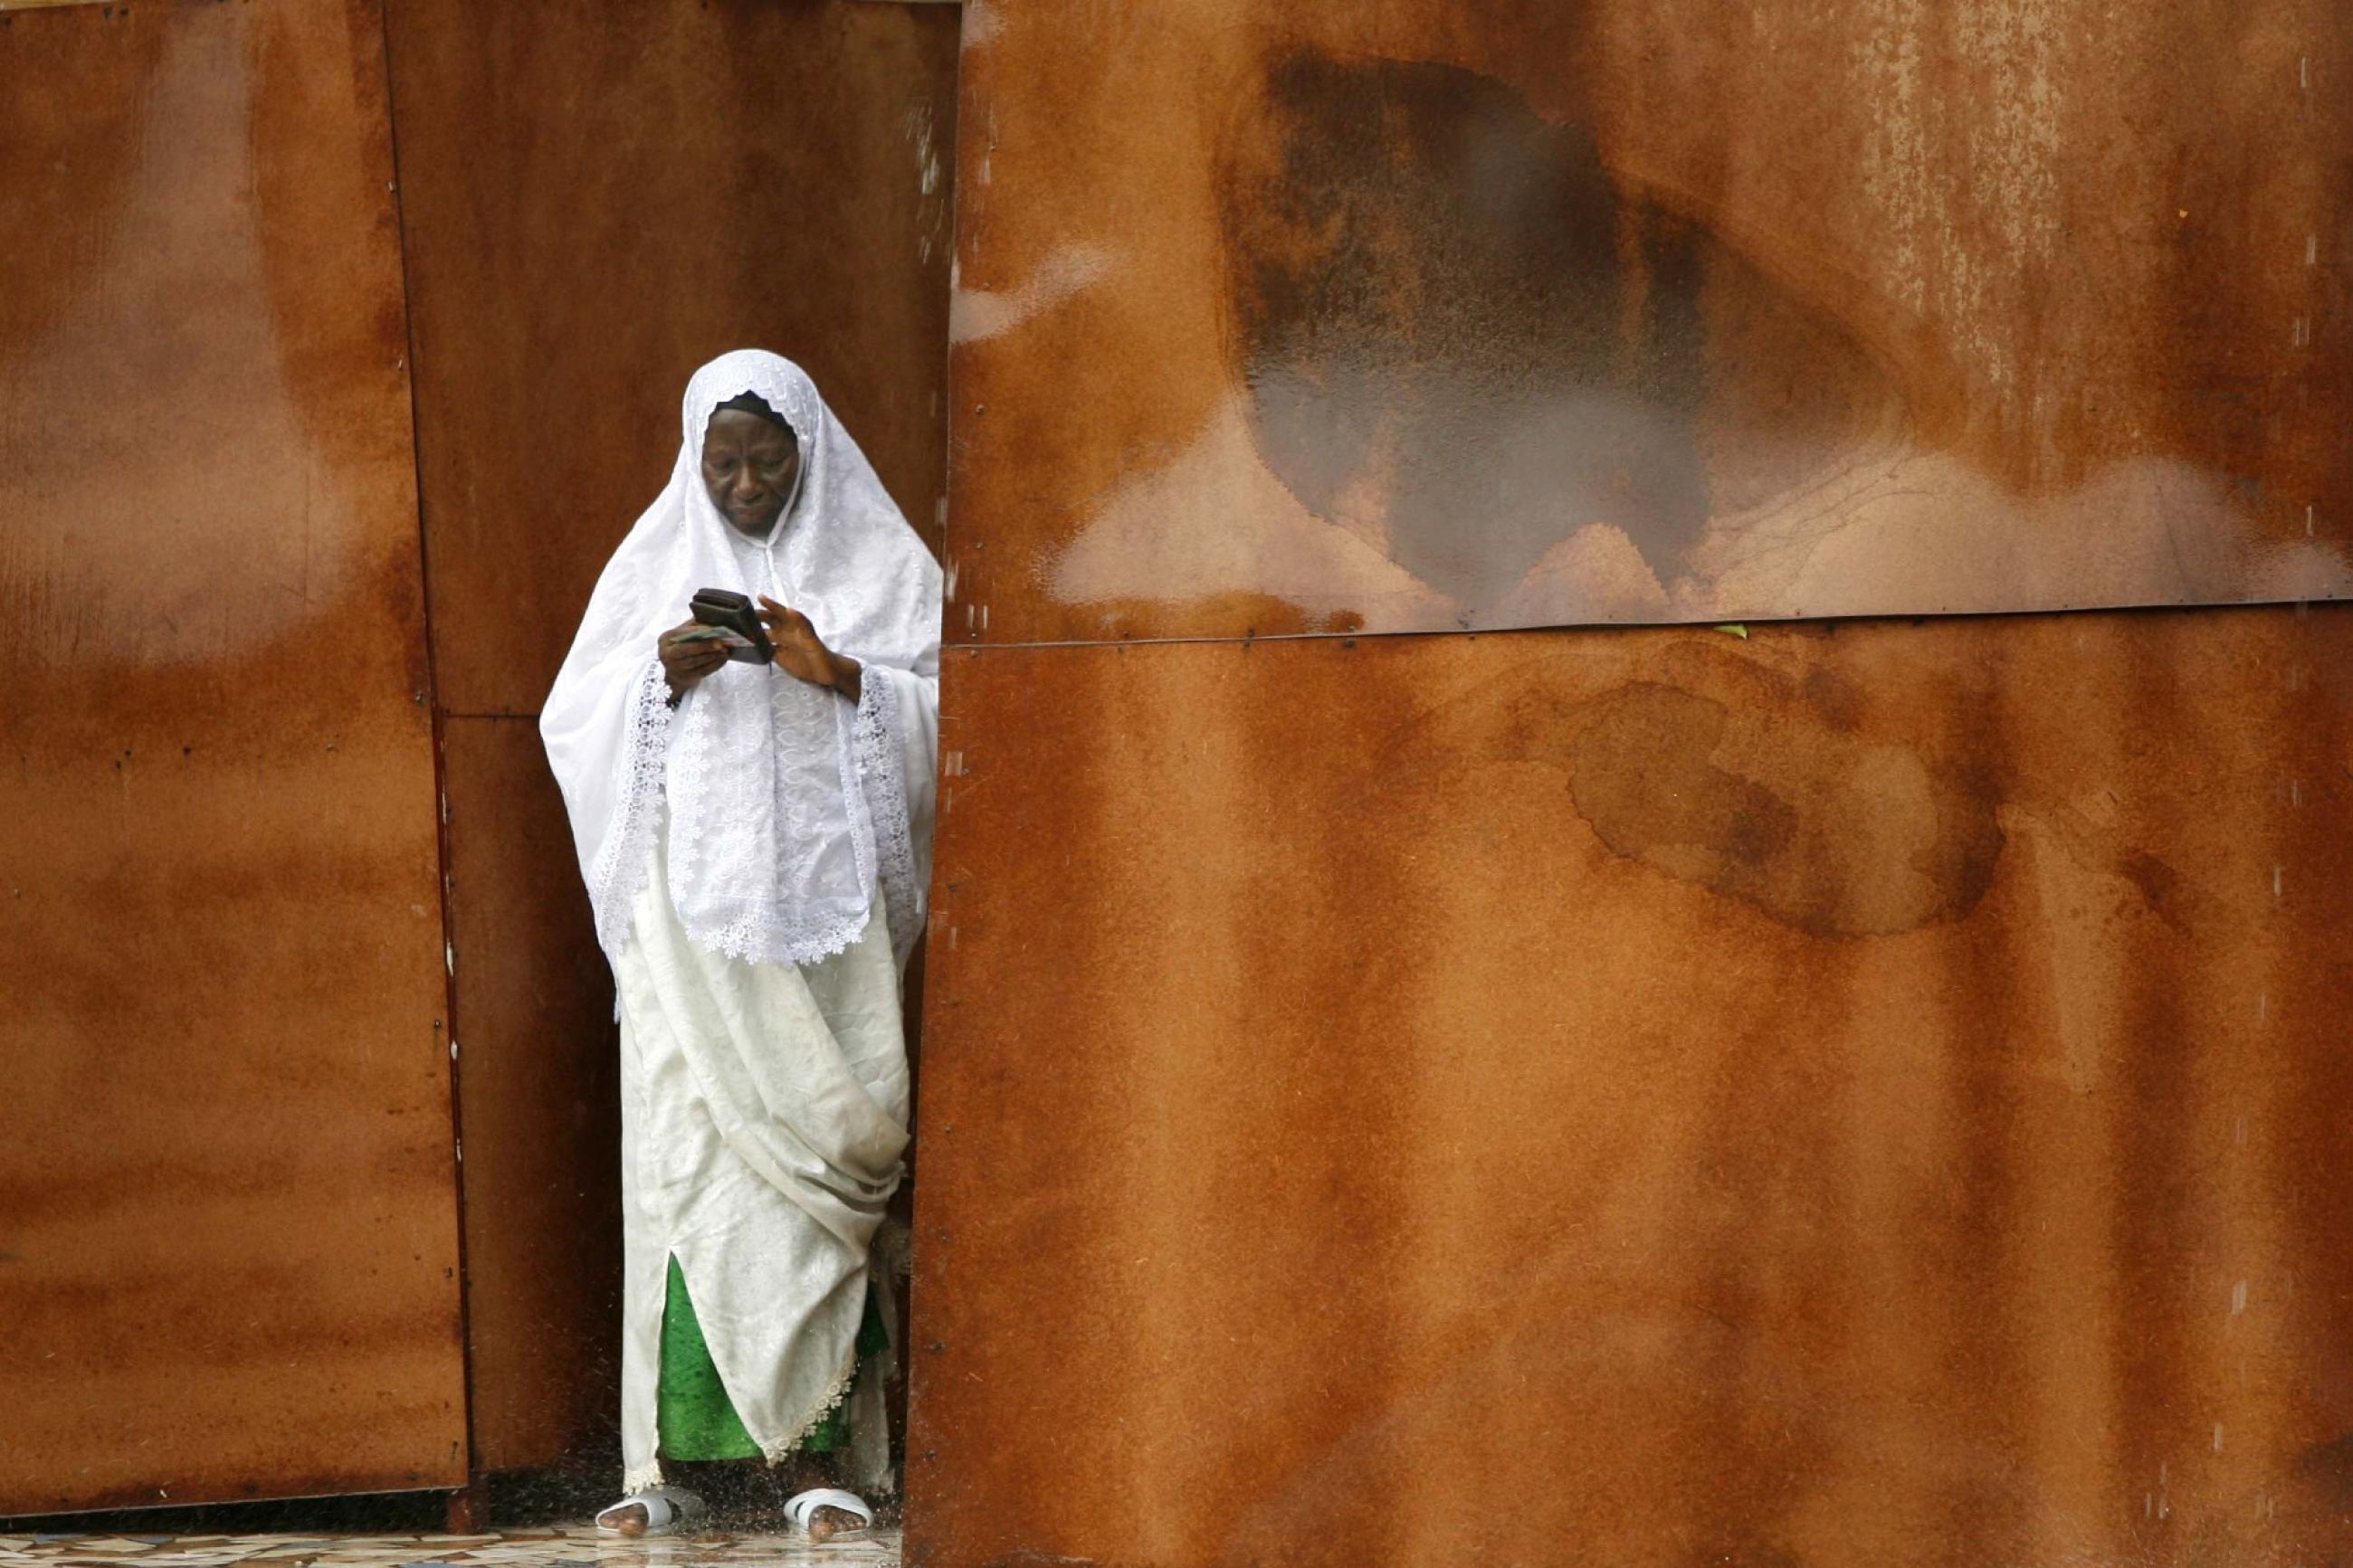 A Gambian woman puts her identity card back into her purse while exiting a polling station, in Serekunda, Gambia, on September 22, 2006.